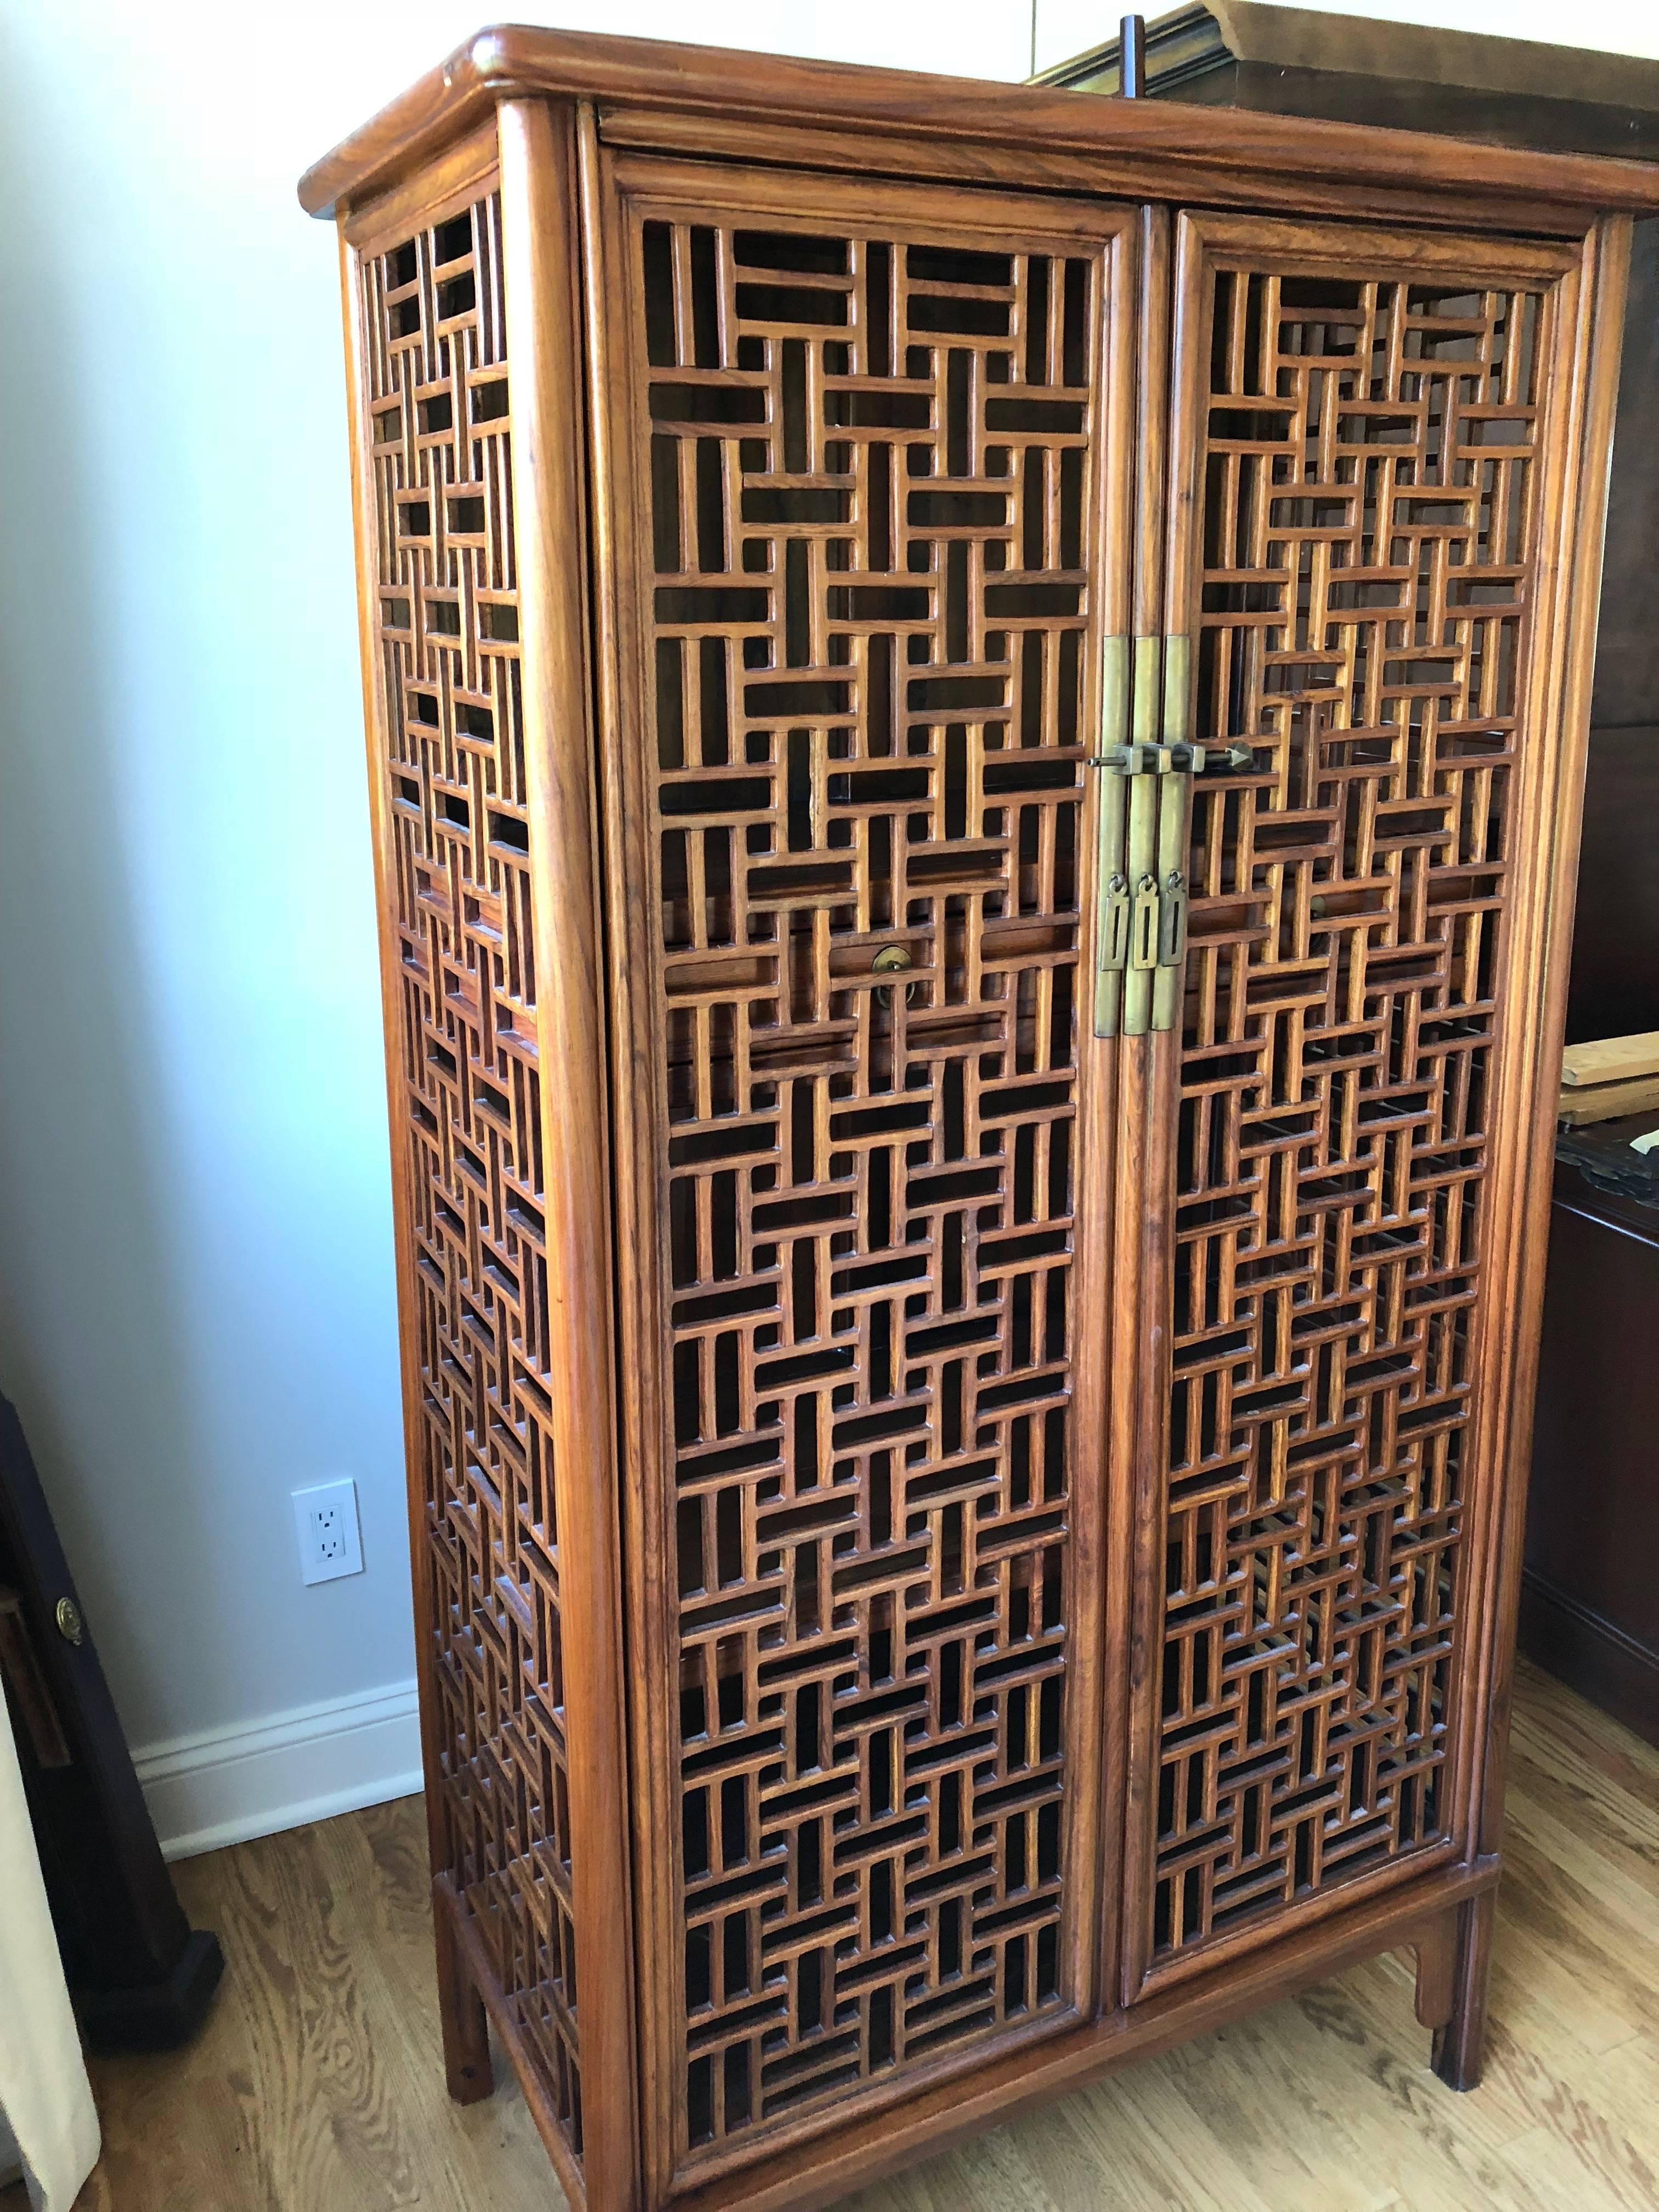 A beautiful and versatile open lattice cabinet in gorgeous Huanghuali hardwood, having Asian style hardware with two doors that open to shelves and two drawers inside.
Purchased in Singapore about 25 years ago from Tomlinson Antique House.